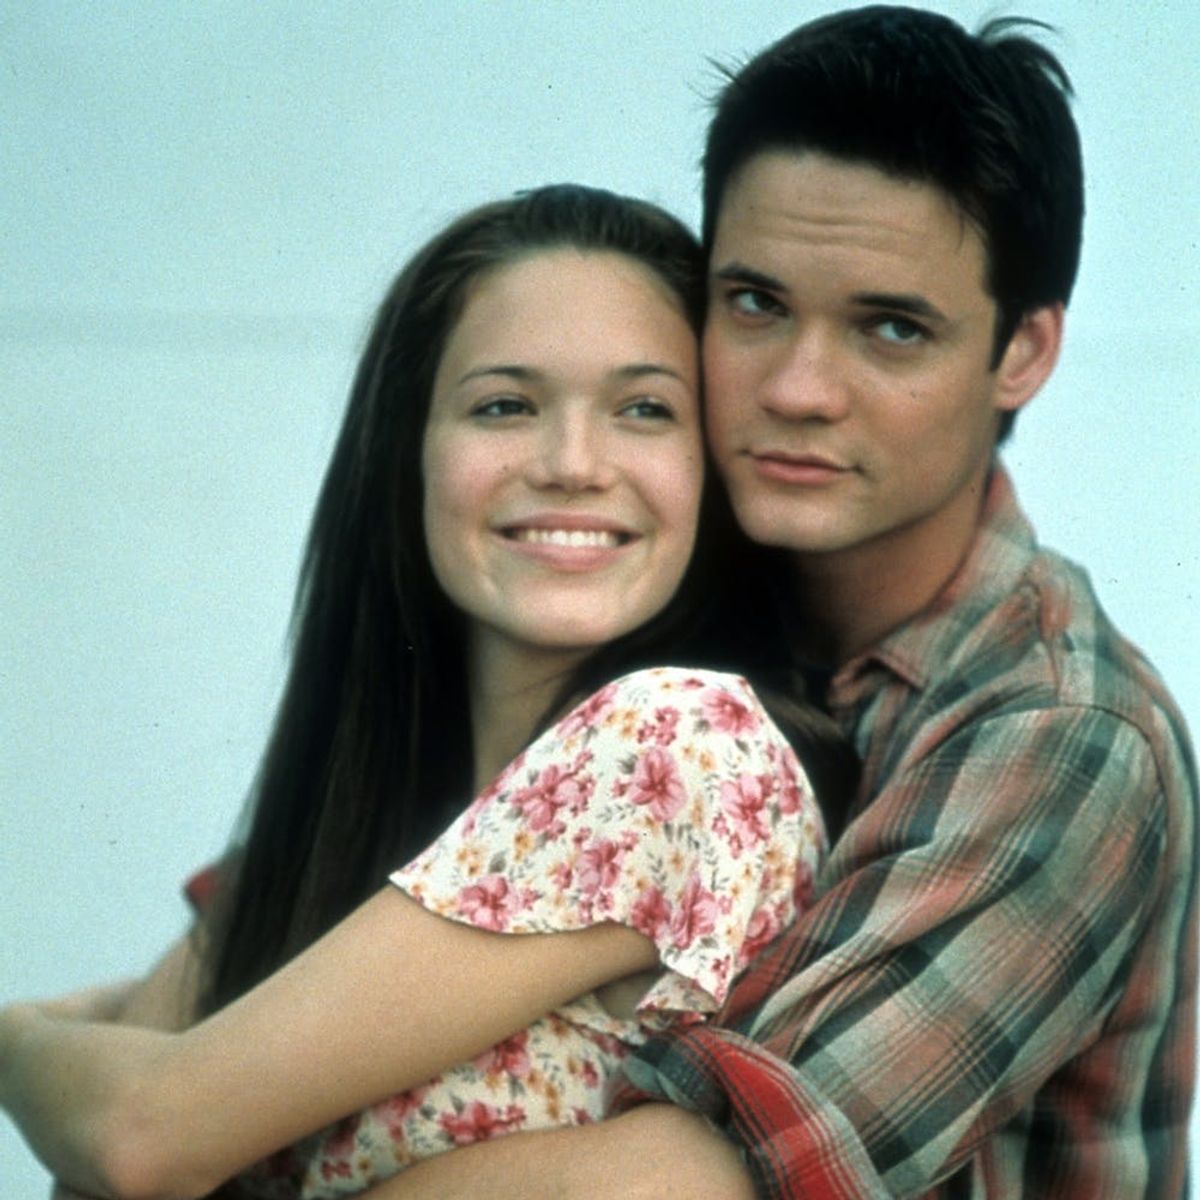 This Is the Walk to Remember Reunion Photo You’ve Waited 15 Years to See